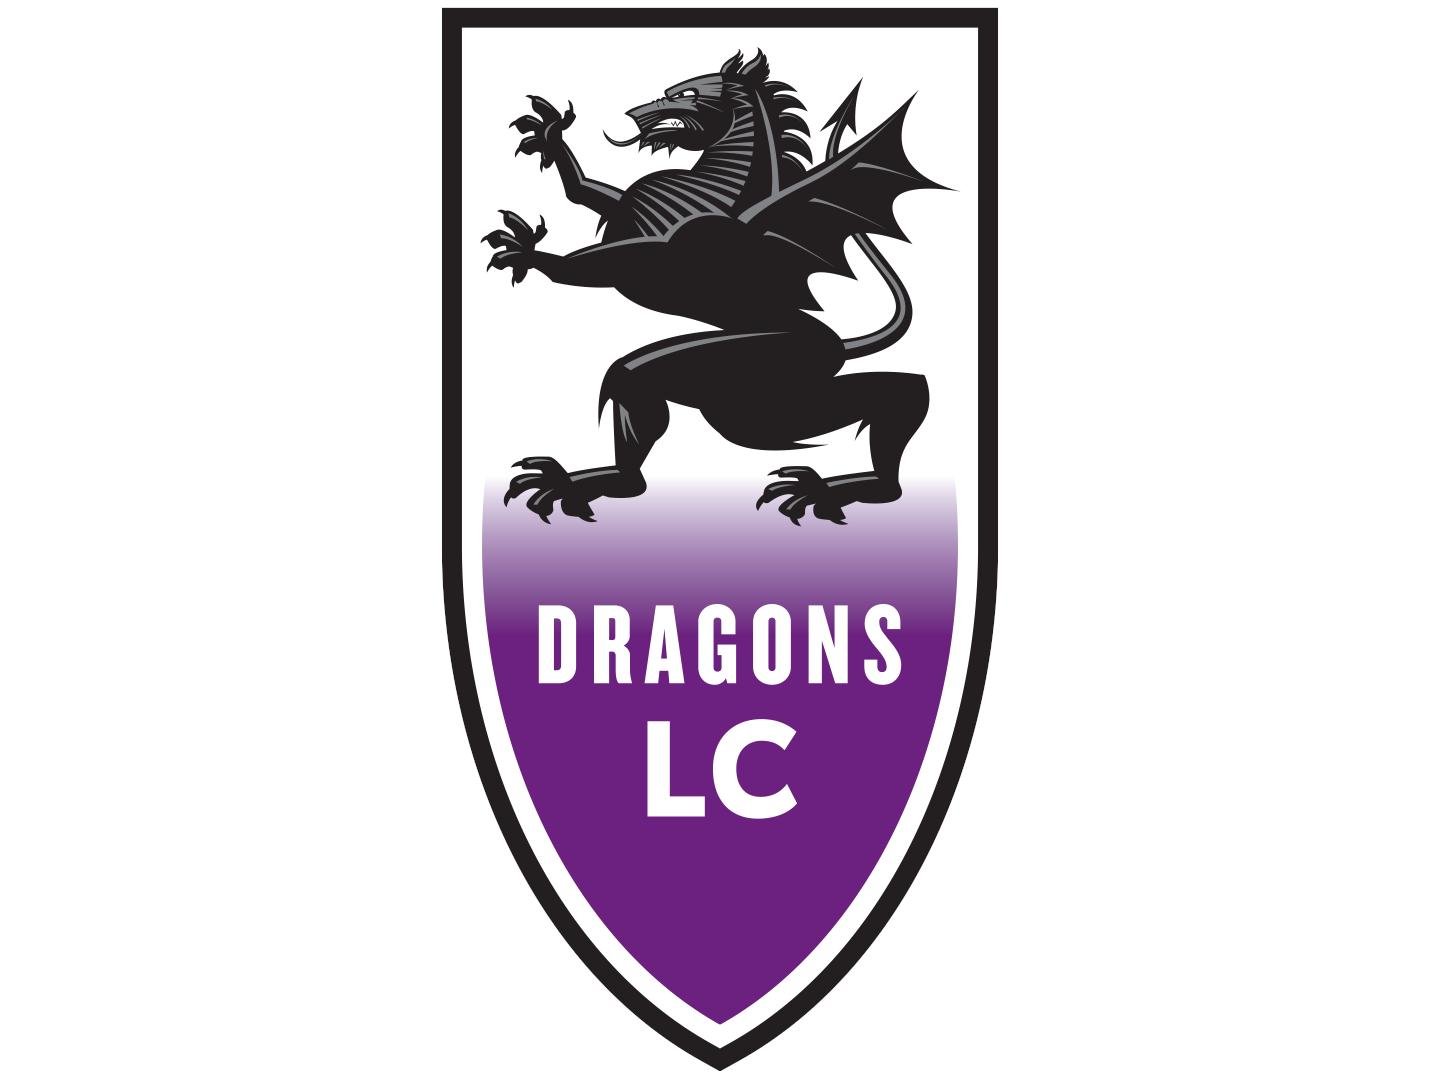 Dragons LC provides a competitive lacrosse opportunity combined with a commitment to the ongoing development of players from across Connecticut